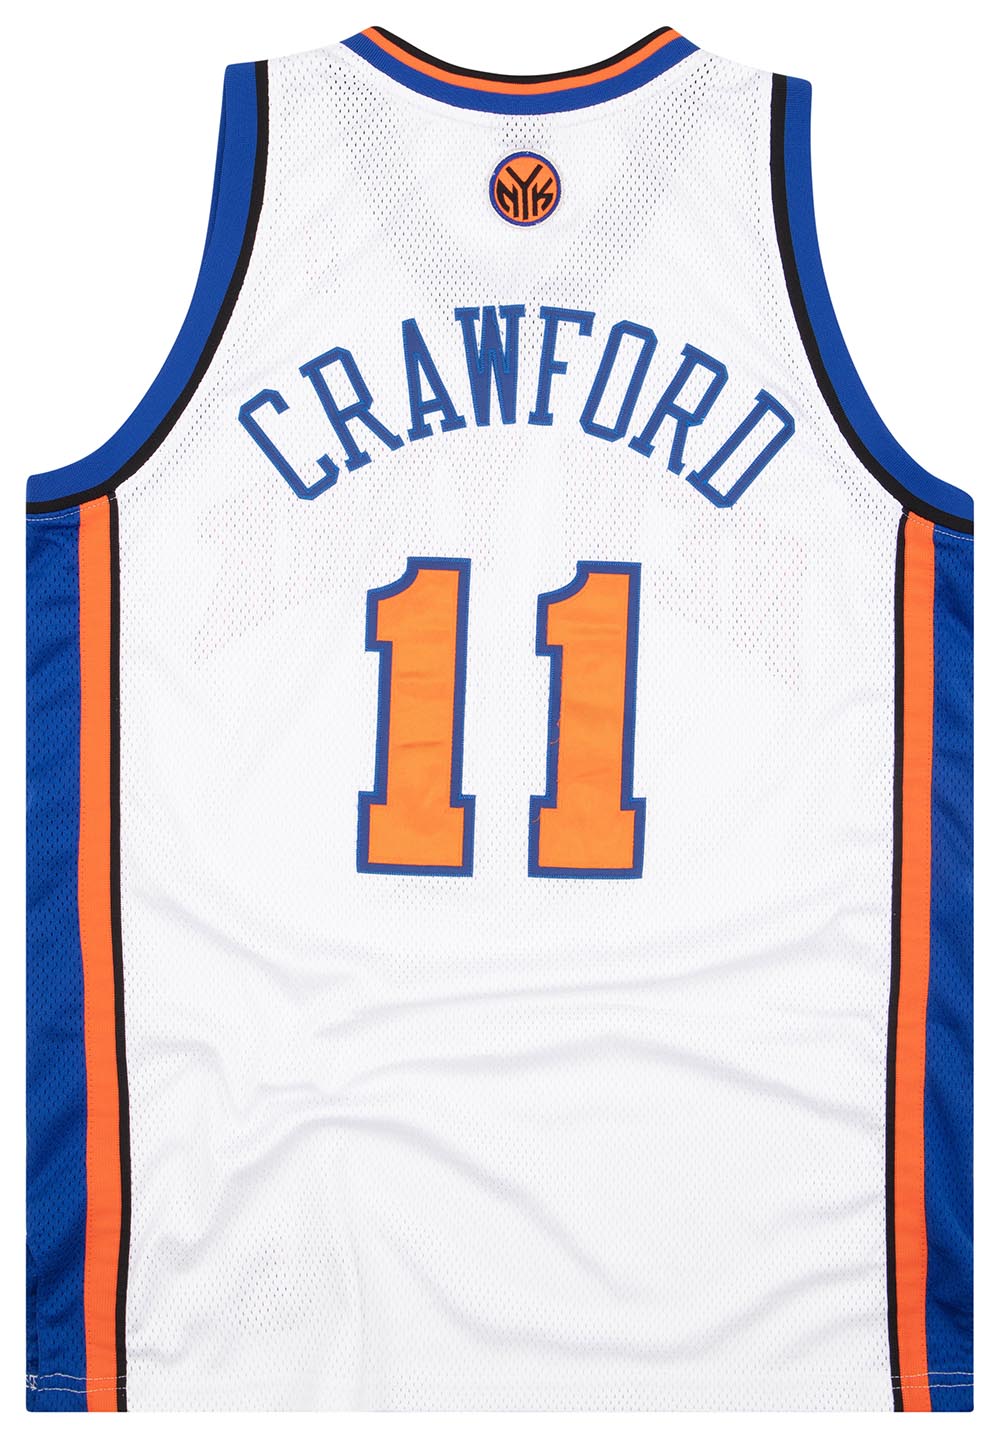 2006-08 AUTHENTIC NEW YORK KNICKS CRAWFORD #11 ADIDAS JERSEY (HOME